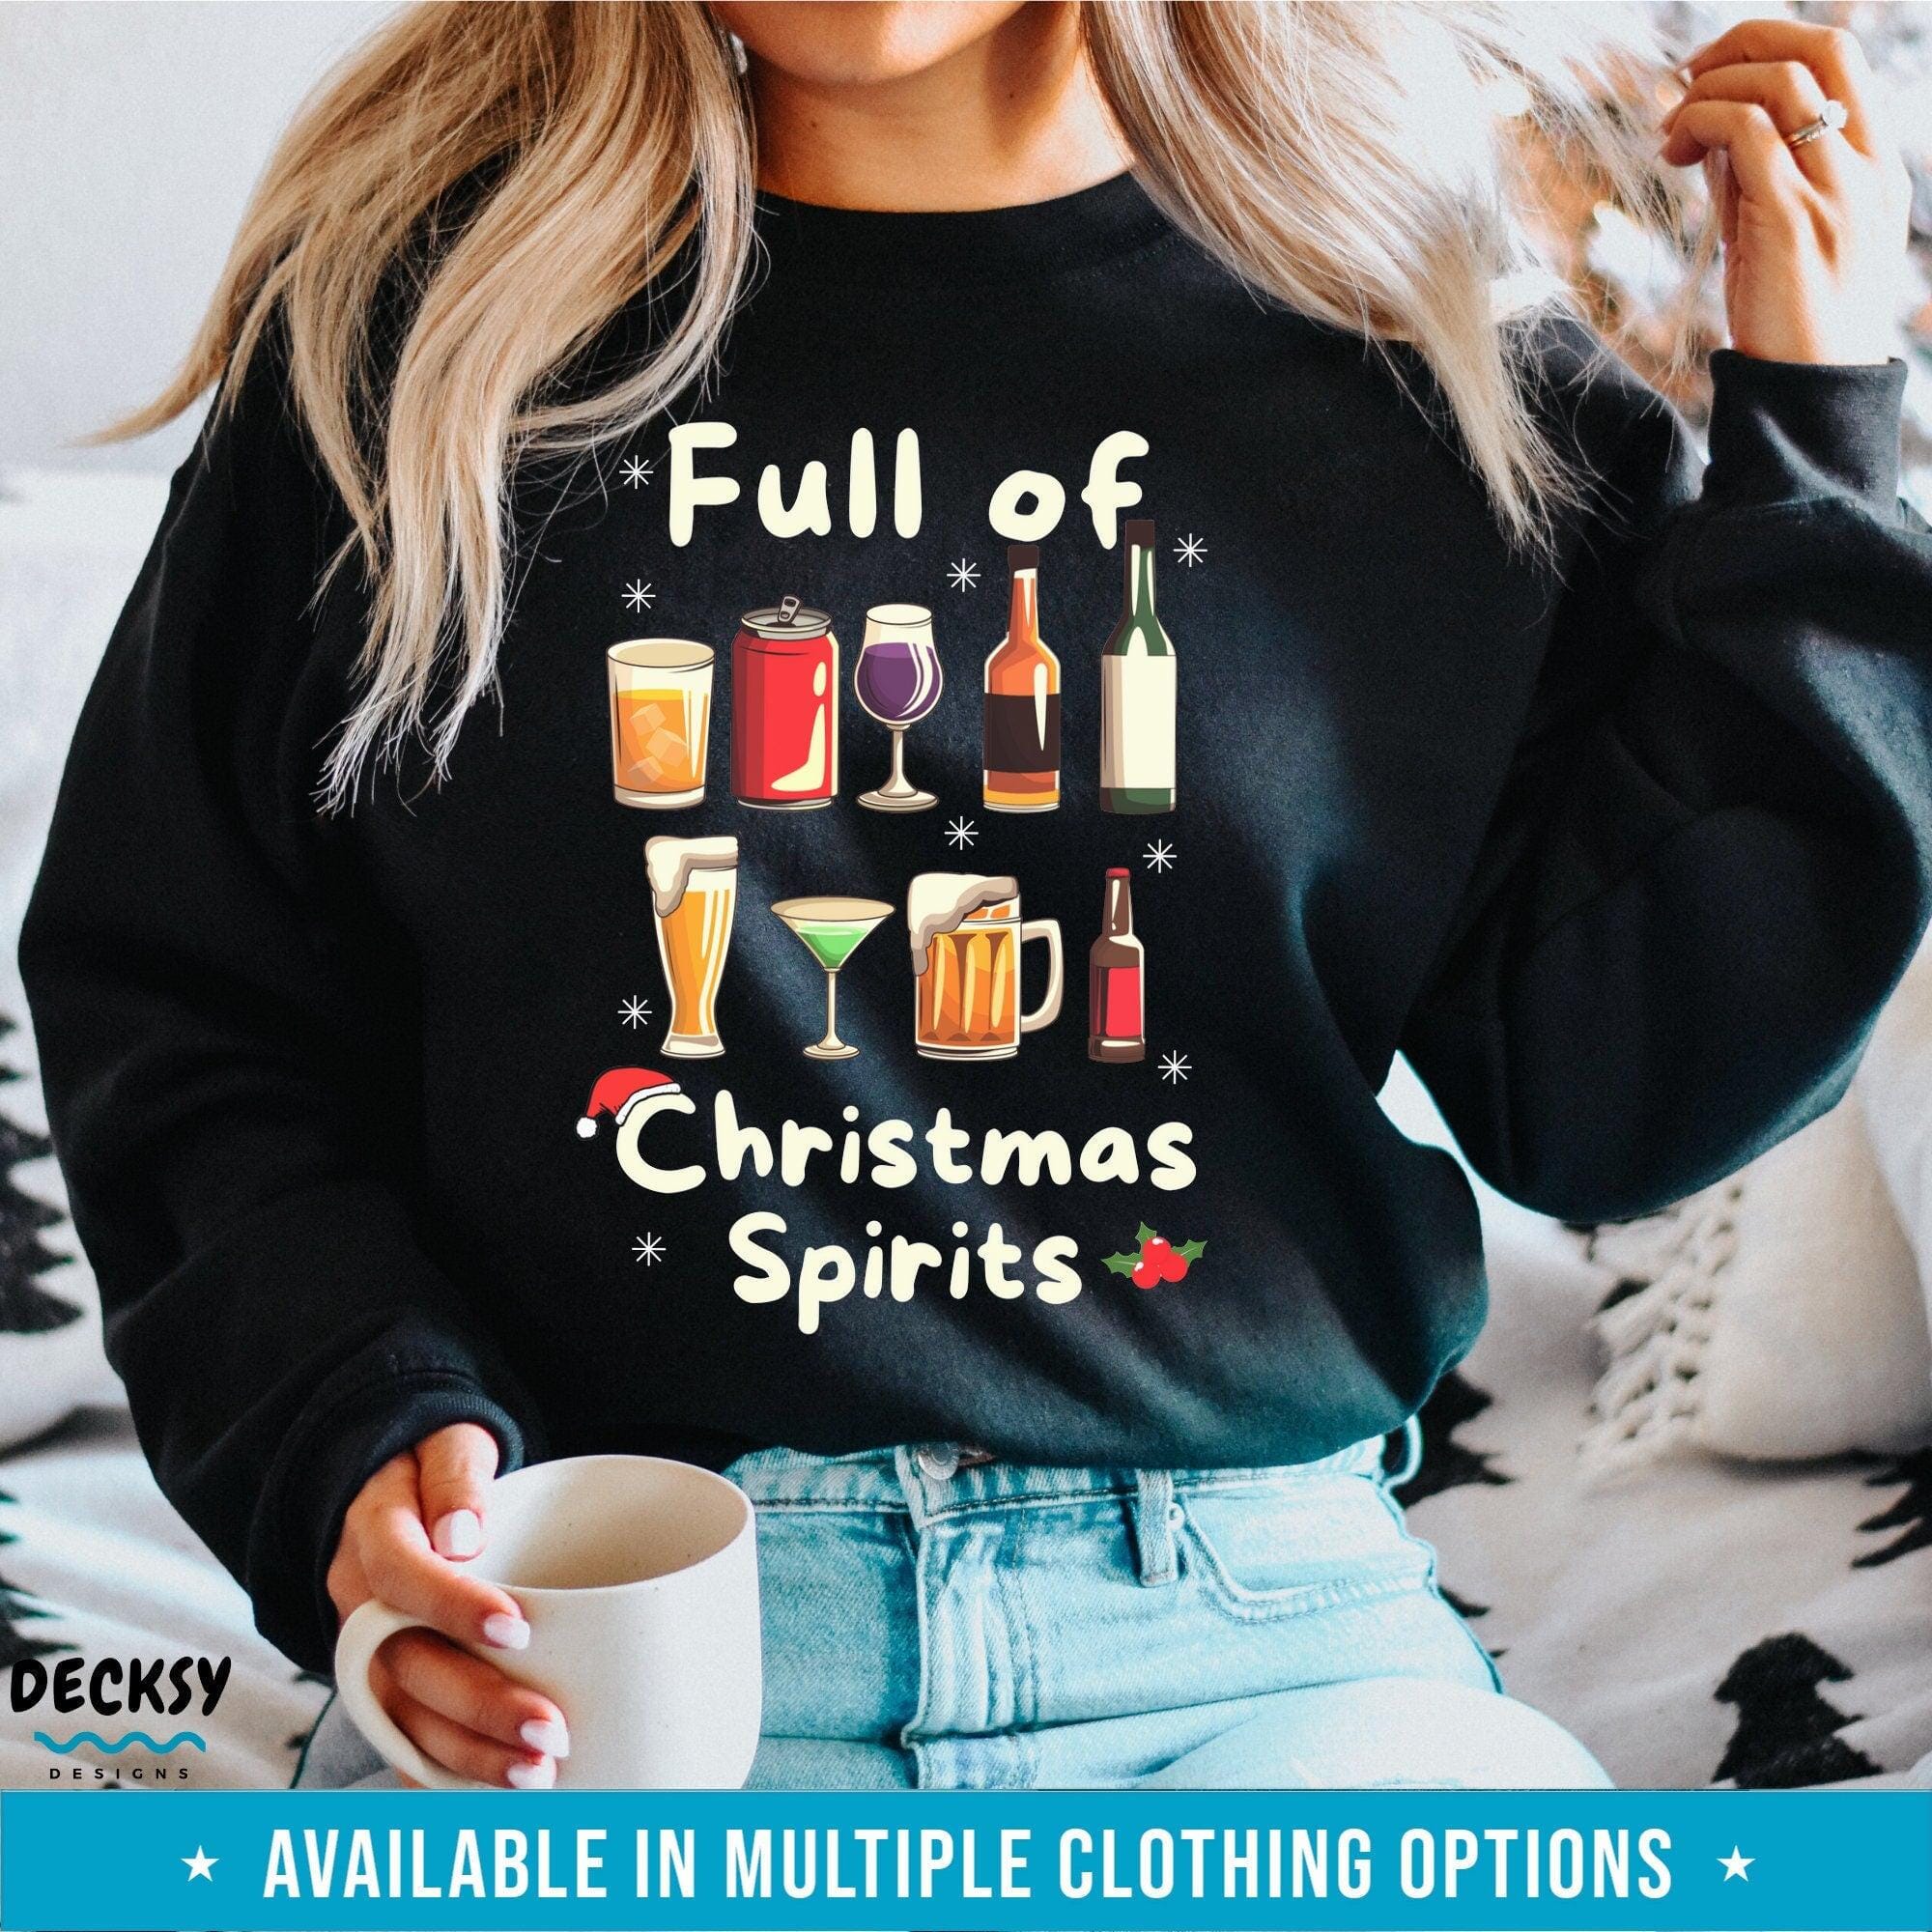 Christmas Party Tee, Funny Christmas Gift-Clothing:Gender-Neutral Adult Clothing:Tops & Tees:T-shirts:Graphic Tees-DecksyDesigns